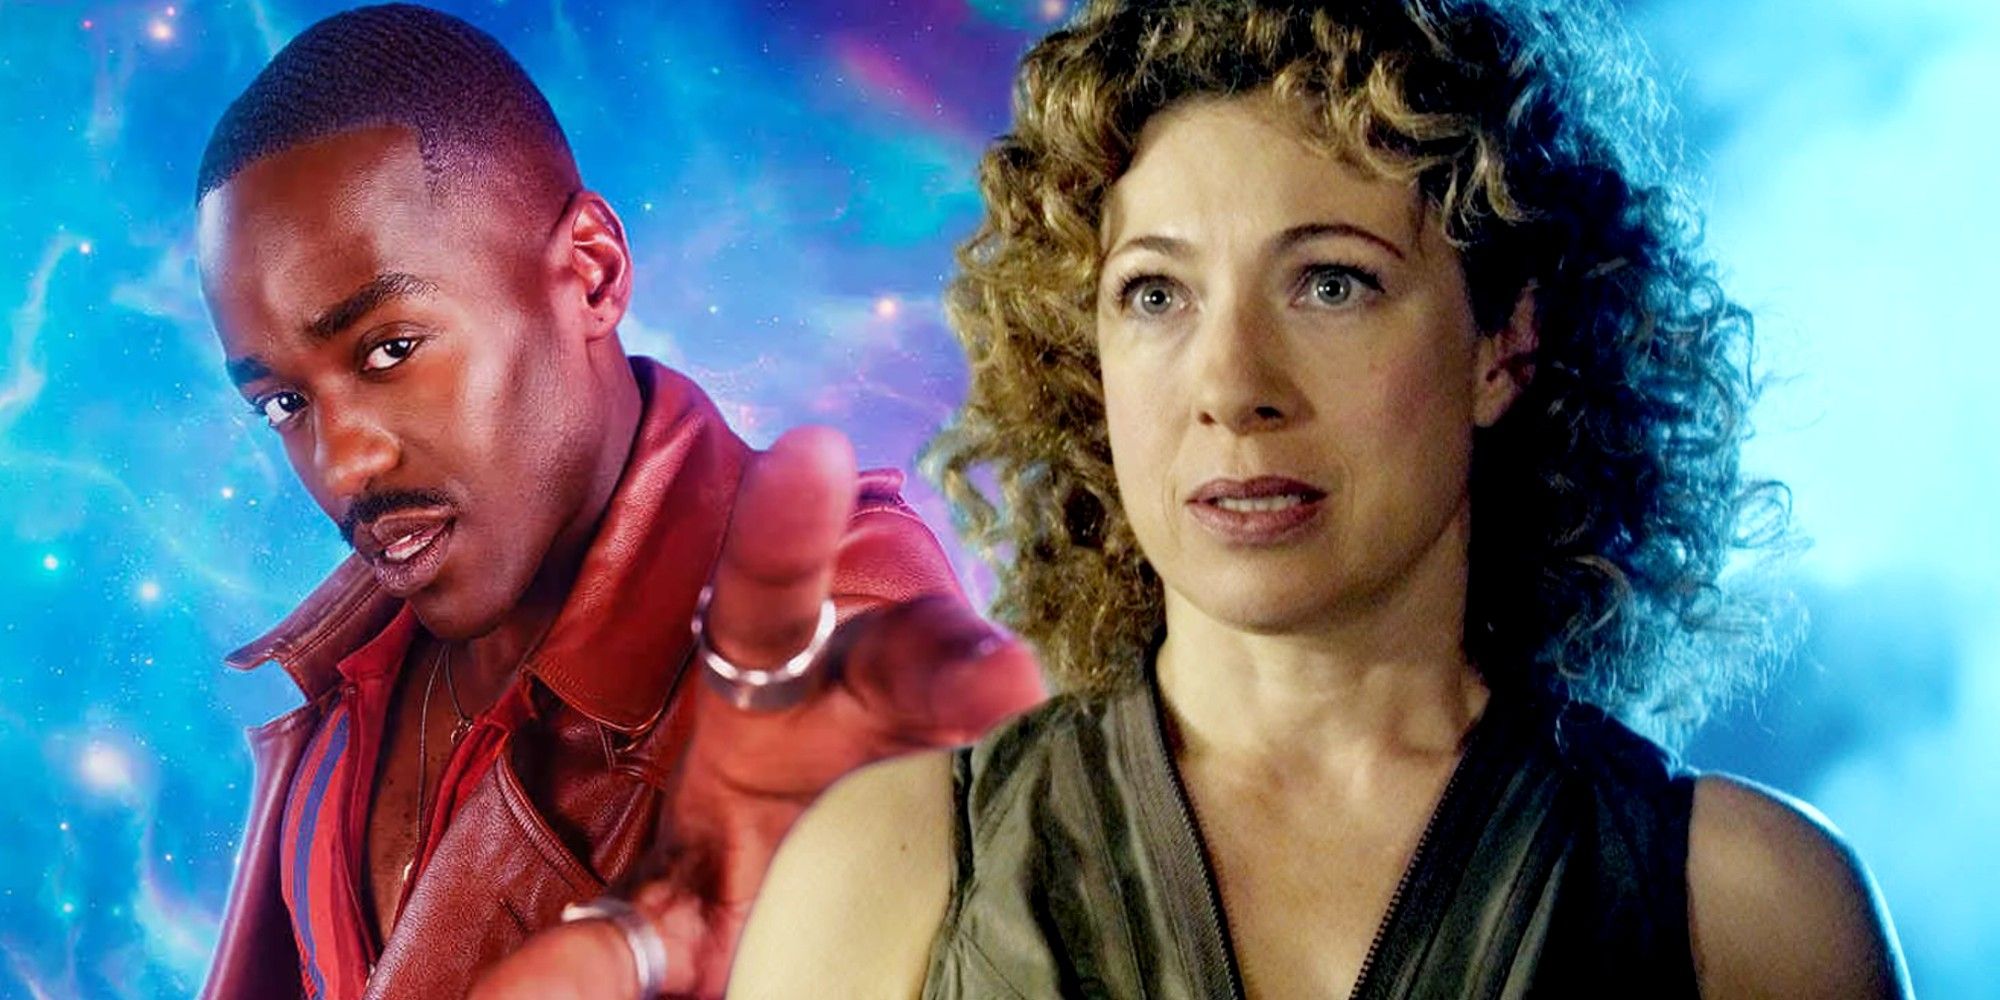 Custom image of River Song and Ncuti Gatwa's Doctor in Doctor Who